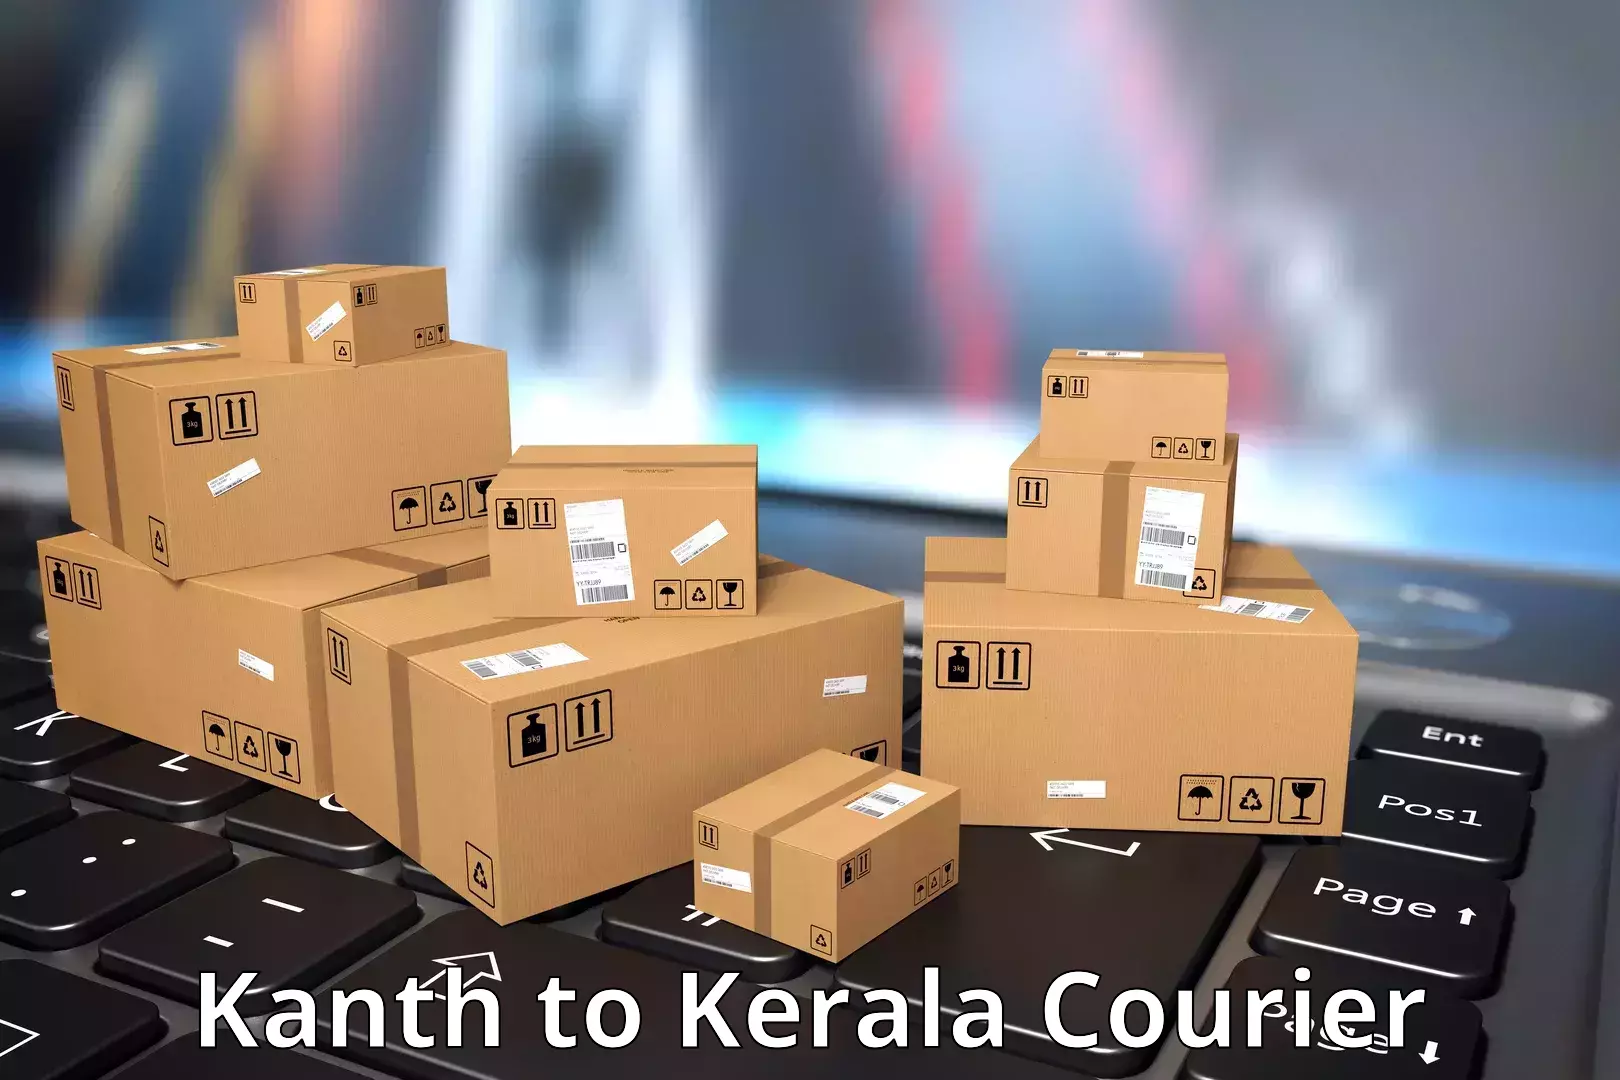 Professional parcel services Kanth to Kozhikode